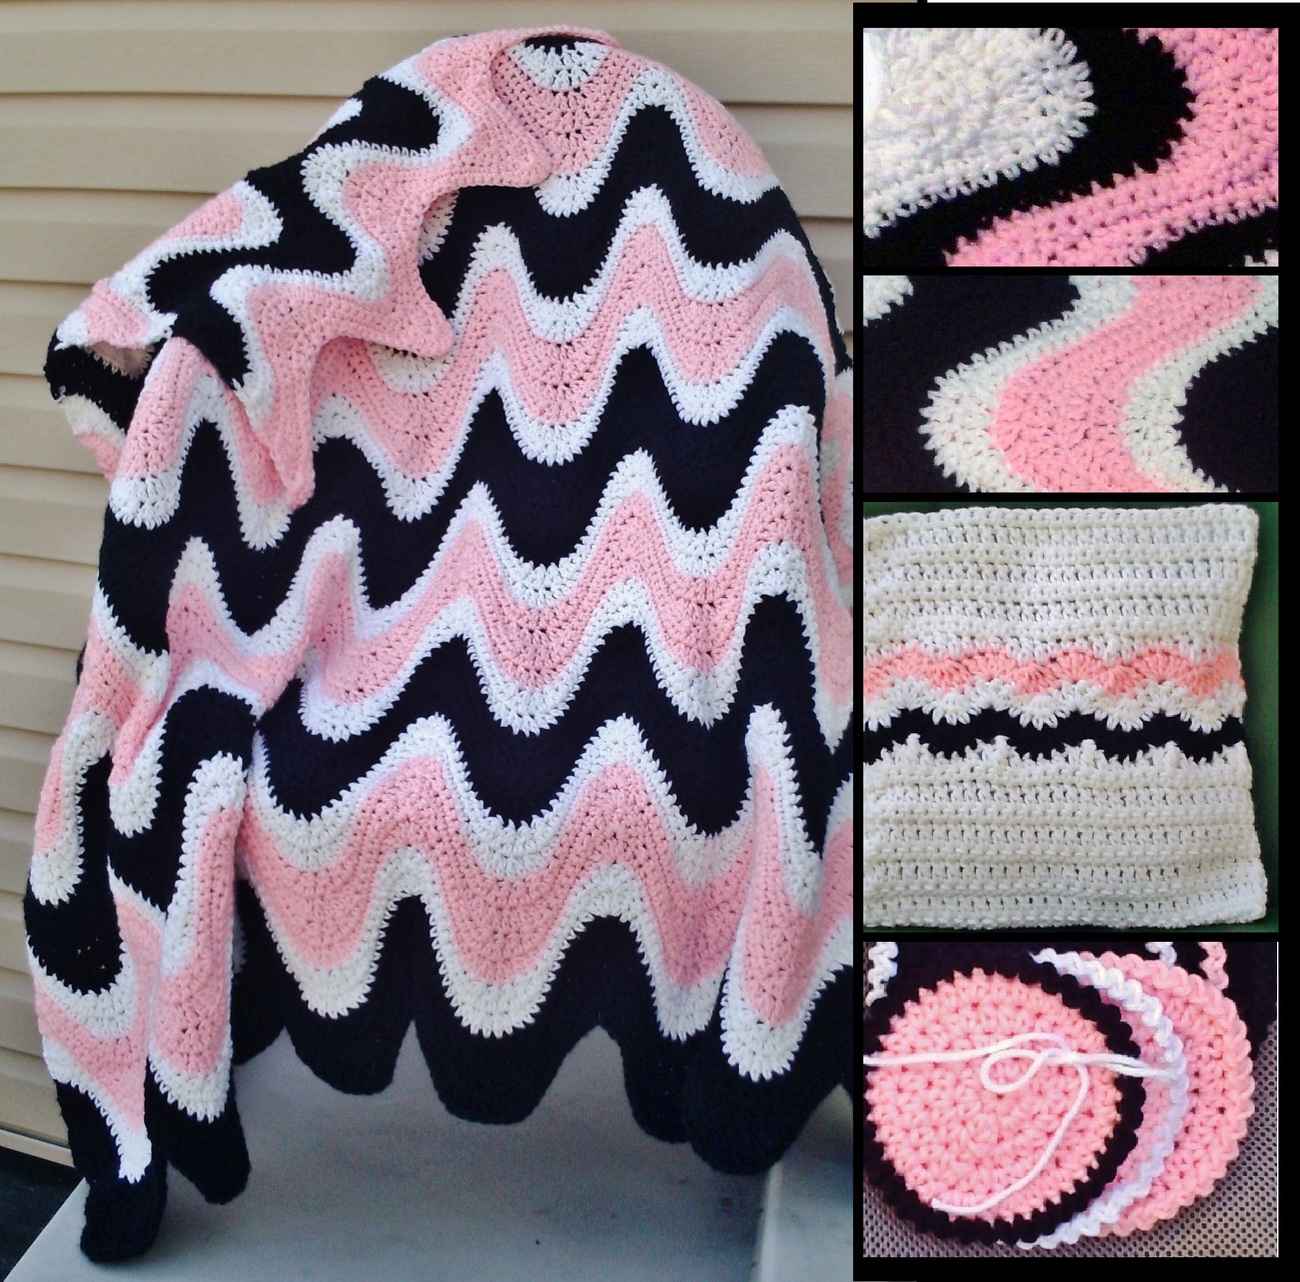 3 Color Exaggerated Ripple Afghan, Pillow & Coasters Crochet Pattern B PDF File - $6.00